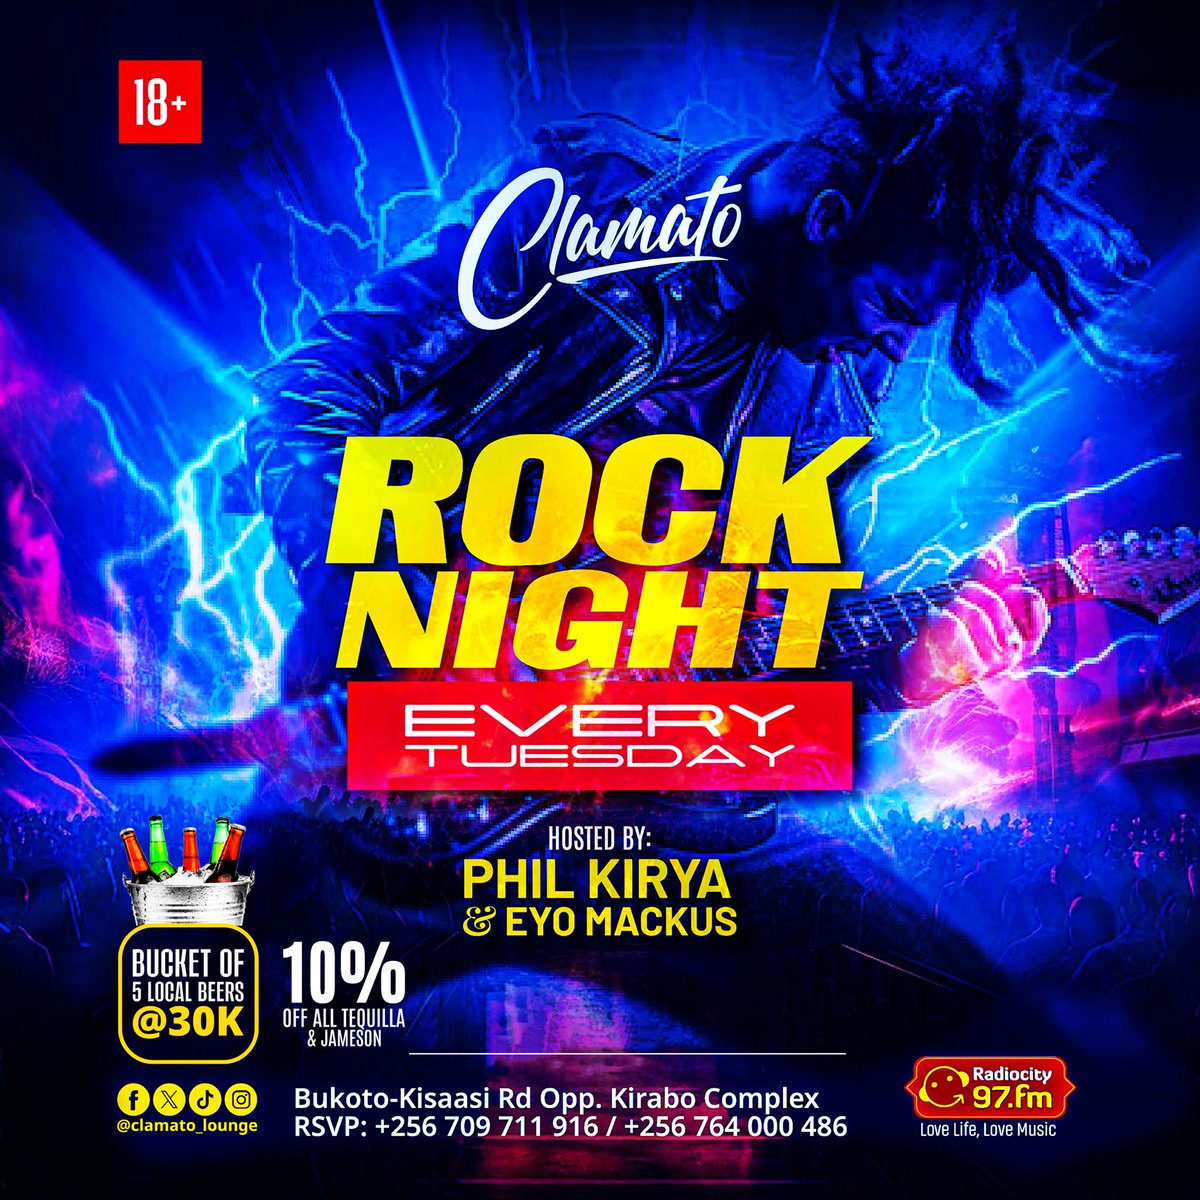 The people asked and we responded. Moving forward we shall have “BUCKET NIGHT” every Tuesday where any of your favorite 5 local beers go for 30k. Organise your squad, we looking forward to cheering with you. Music policy by @PhilKirya @EyoMackus #ClamatoRockTuesday